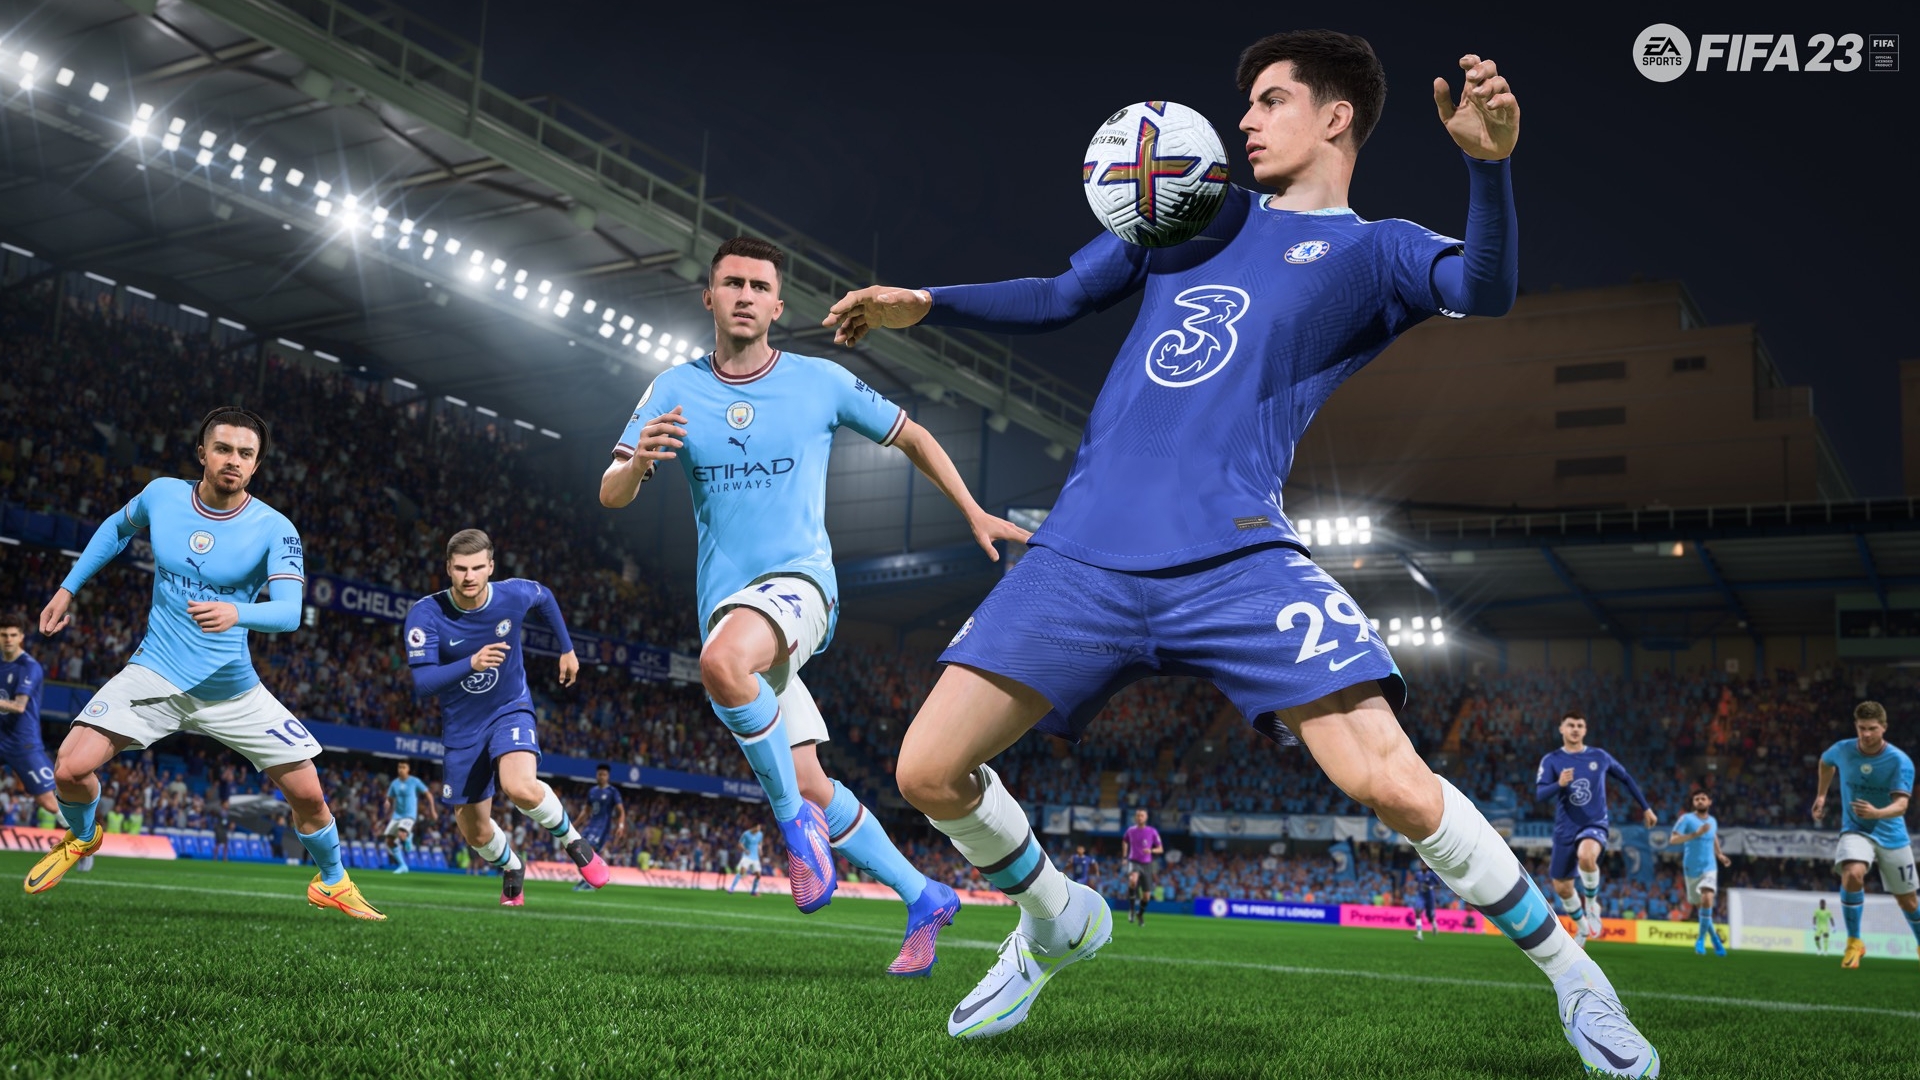 FIFA 23 ratings: Top 23 officially announced